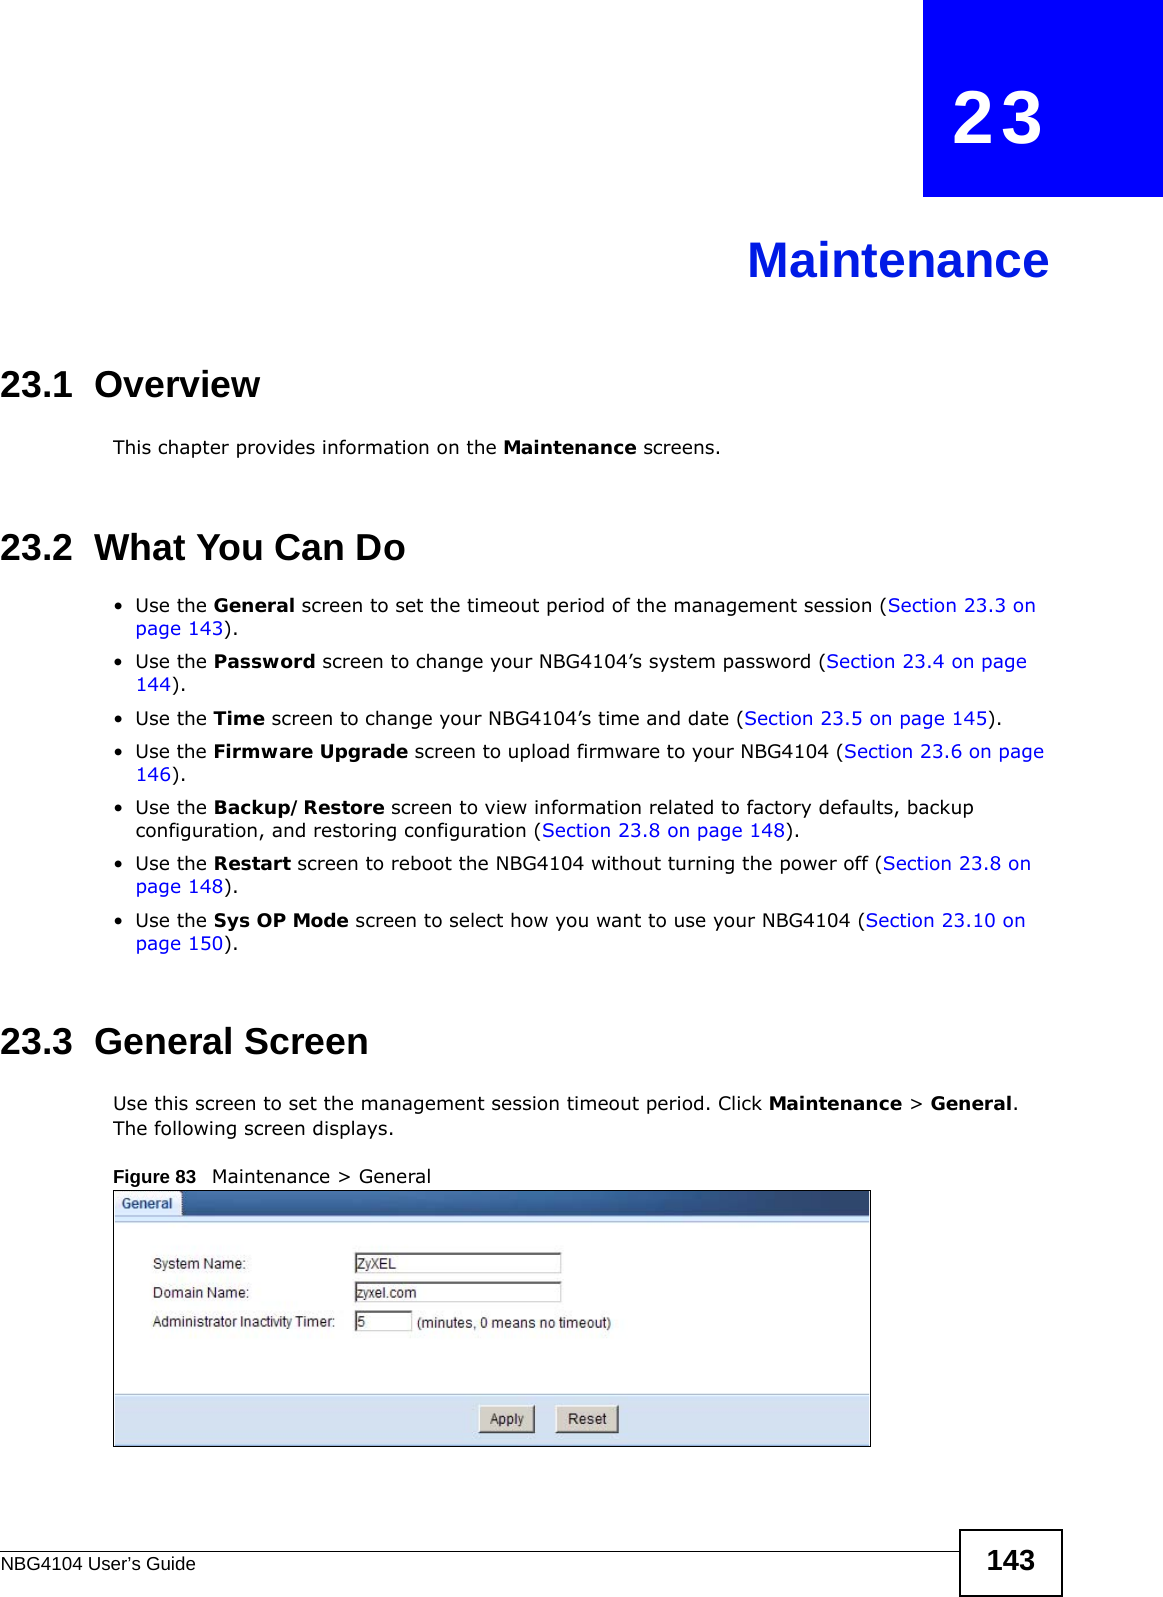 NBG4104 User’s Guide 143CHAPTER   23Maintenance23.1  OverviewThis chapter provides information on the Maintenance screens. 23.2  What You Can Do•Use the General screen to set the timeout period of the management session (Section 23.3 on page 143). •Use the Password screen to change your NBG4104’s system password (Section 23.4 on page 144).•Use the Time screen to change your NBG4104’s time and date (Section 23.5 on page 145).•Use the Firmware Upgrade screen to upload firmware to your NBG4104 (Section 23.6 on page 146).•Use the Backup/Restore screen to view information related to factory defaults, backup configuration, and restoring configuration (Section 23.8 on page 148).•Use the Restart screen to reboot the NBG4104 without turning the power off (Section 23.8 on page 148).•Use the Sys OP Mode screen to select how you want to use your NBG4104 (Section 23.10 on page 150). 23.3  General Screen Use this screen to set the management session timeout period. Click Maintenance &gt; General. The following screen displays.Figure 83   Maintenance &gt; General 